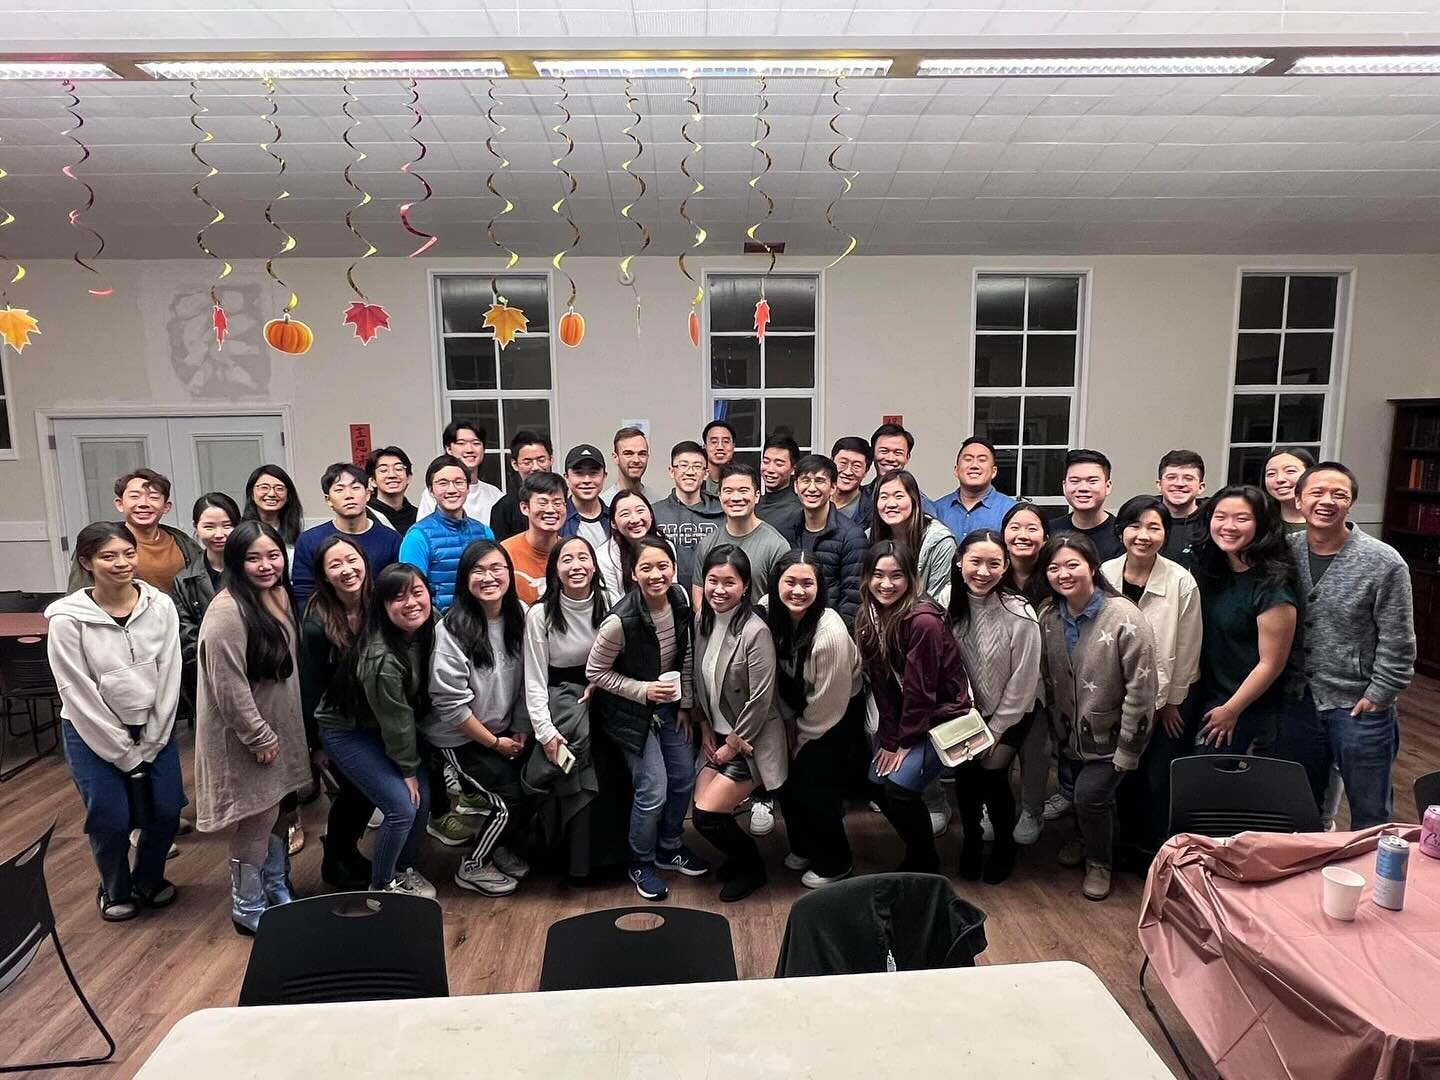 Frienfriendsgivgiving - a friendsgiving with even more friends!🍗

This past Saturday, Living Stones Fellowship had its annual Friendsgiving event. Everyone enjoyed some delicious food and drinks potluck style and then played trivia and board games t